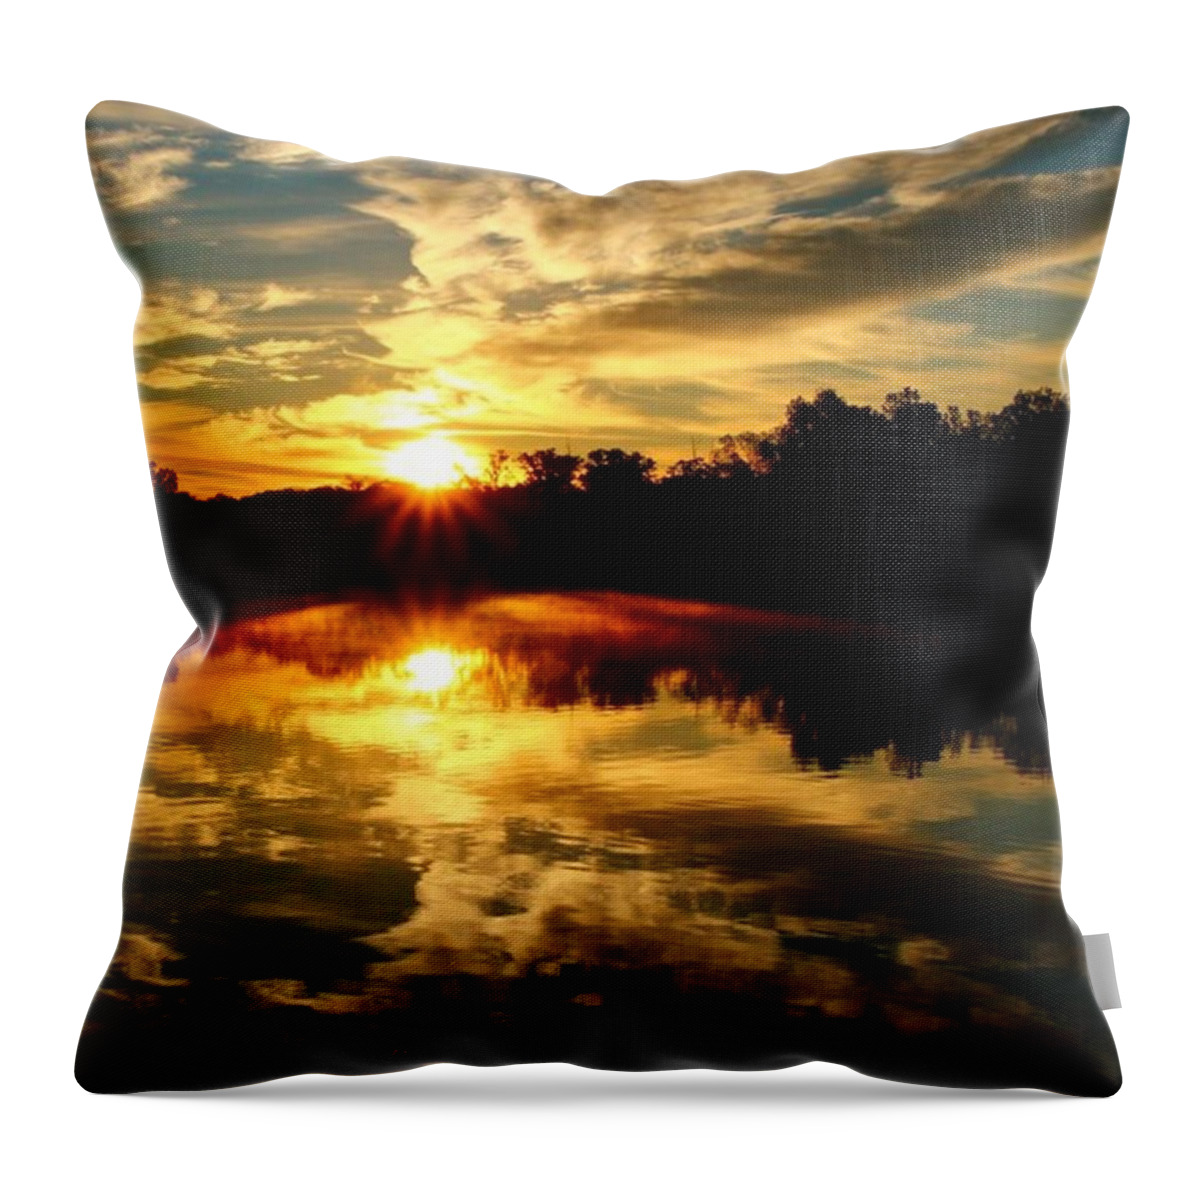  Throw Pillow featuring the photograph Amazing Sunrise Over Thread Lake This by Robert Carey